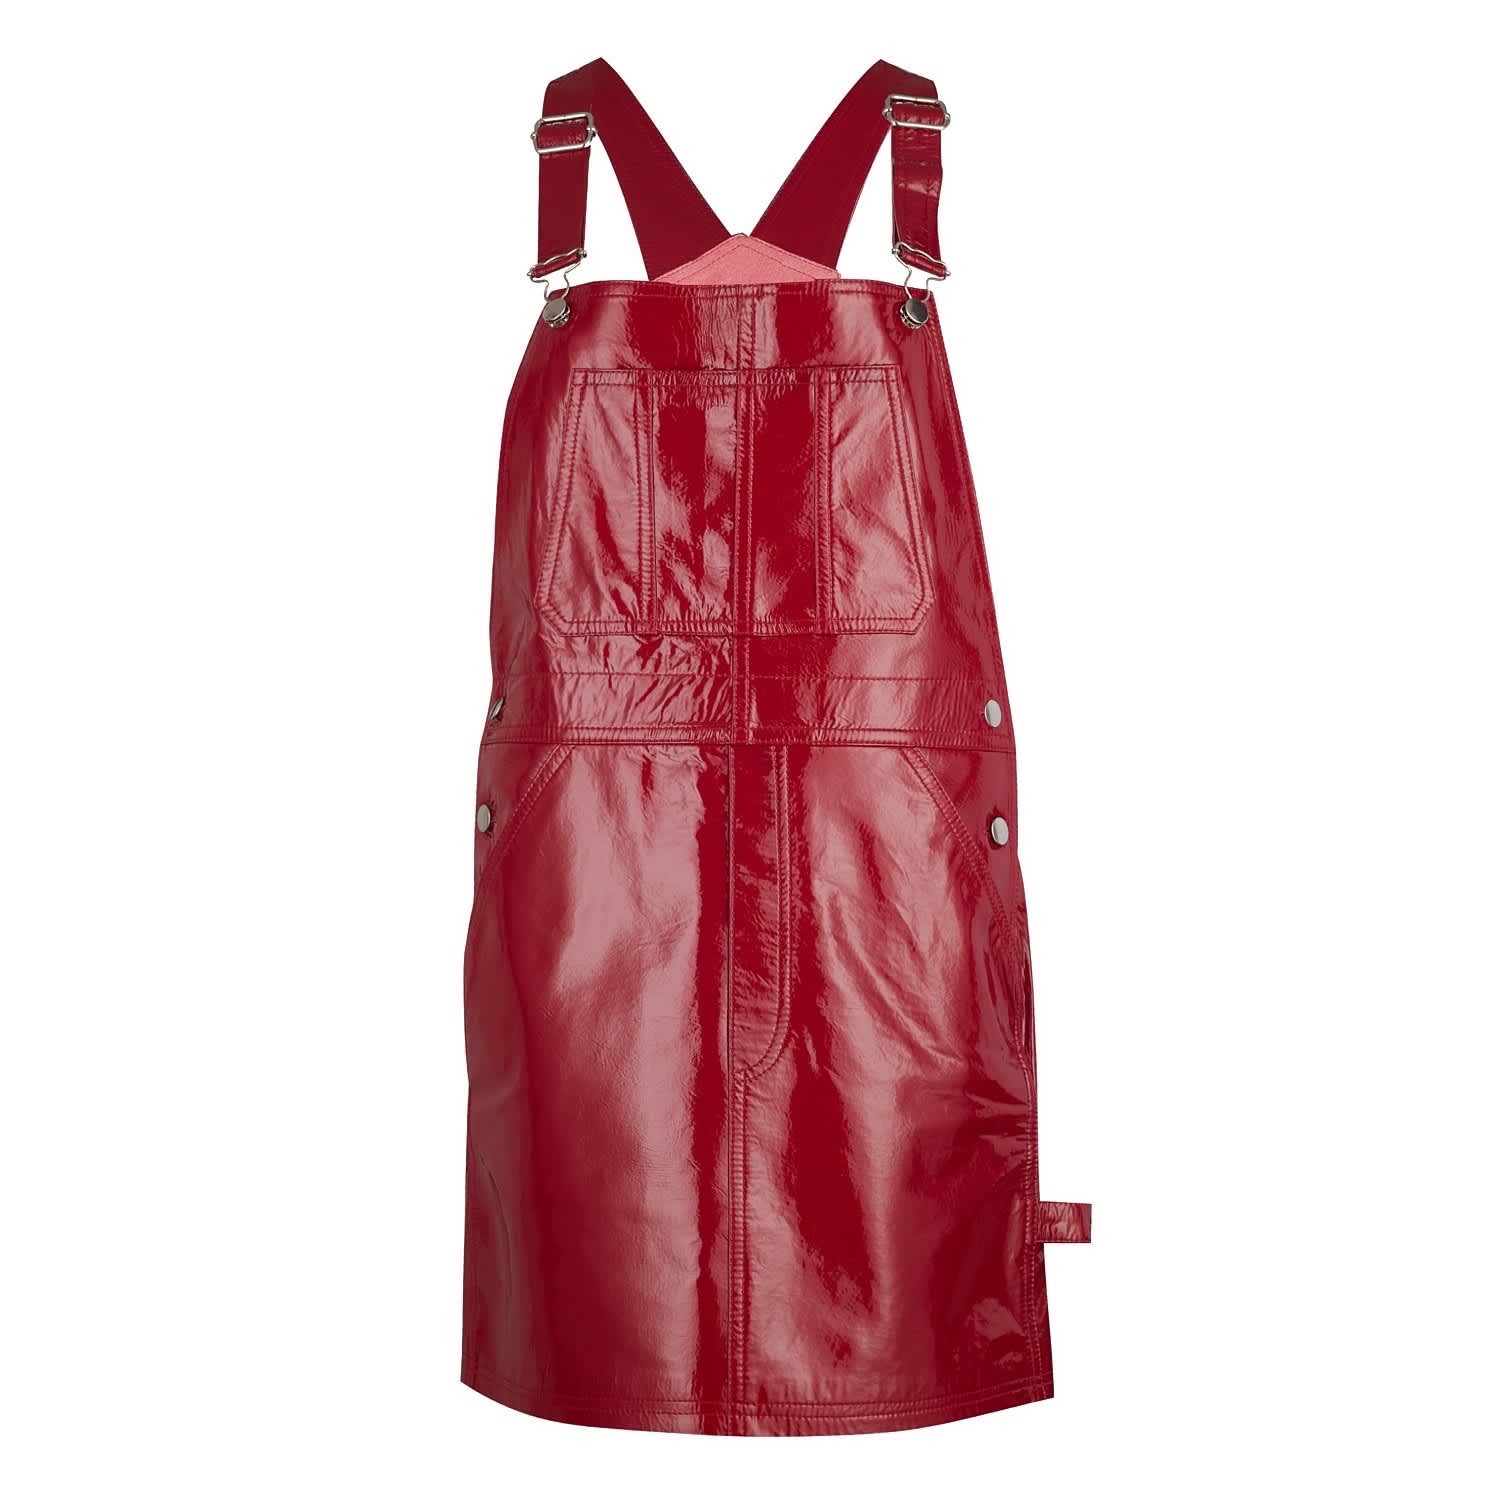 patent leather red dress